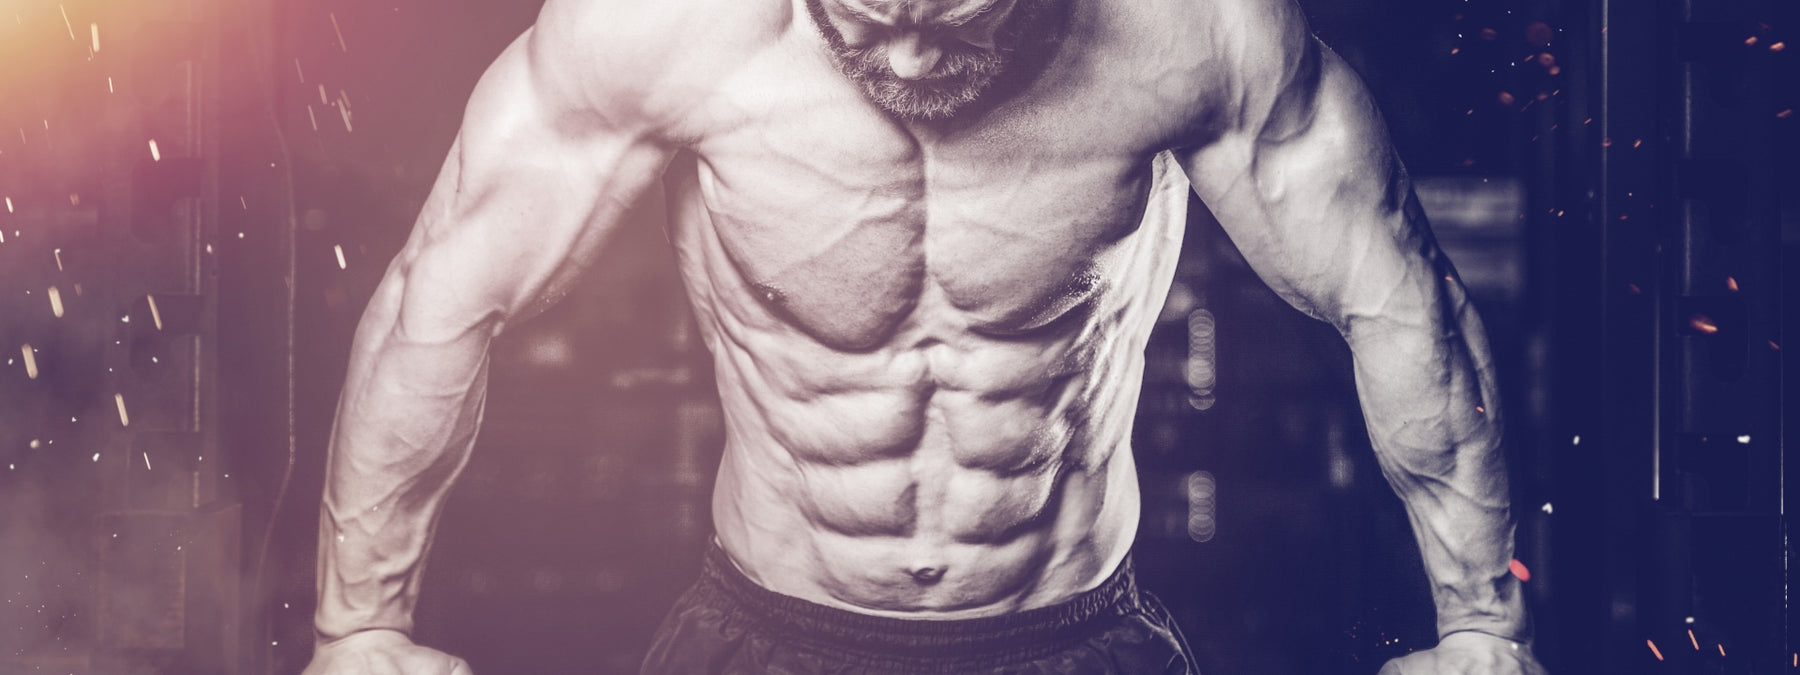 Improve Your Workouts for Abs: 8 Exercises for a Shredded Midsection